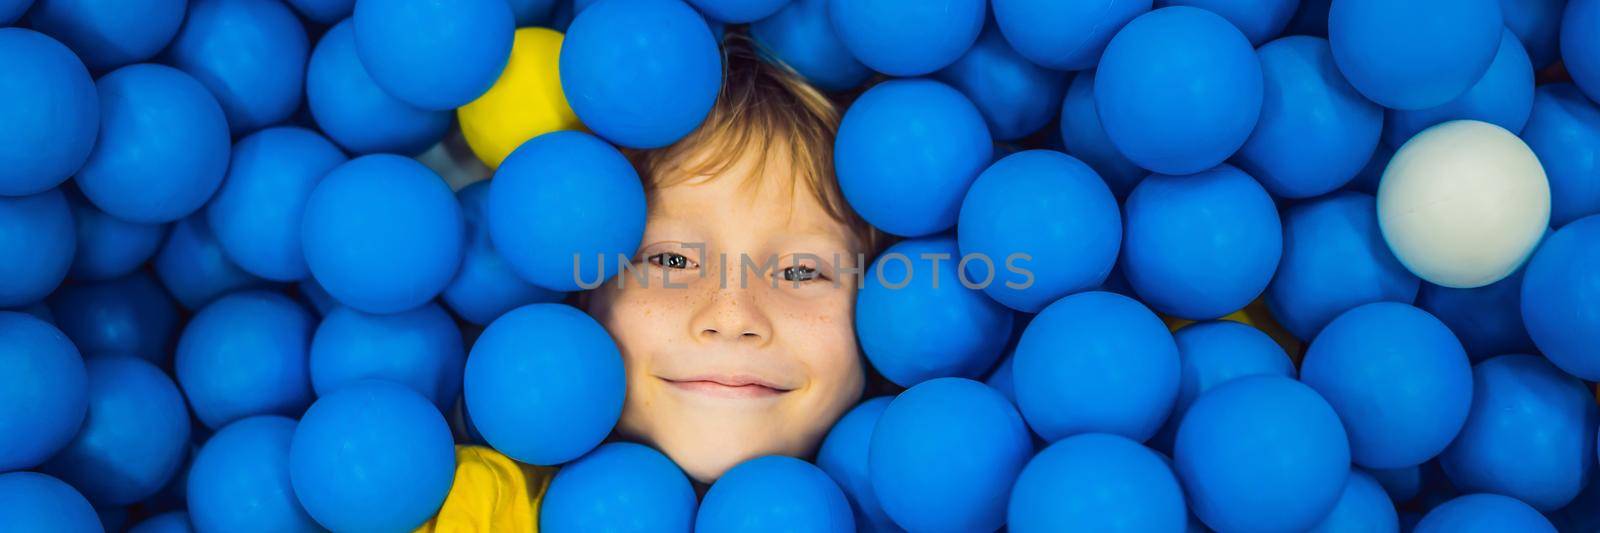 BANNER, LONG FORMAT Child playing in ball pit. Colorful toys for kids. Kindergarten or preschool play room. Toddler kid at day care indoor playground. Balls pool for children. Birthday party for active preschooler by galitskaya